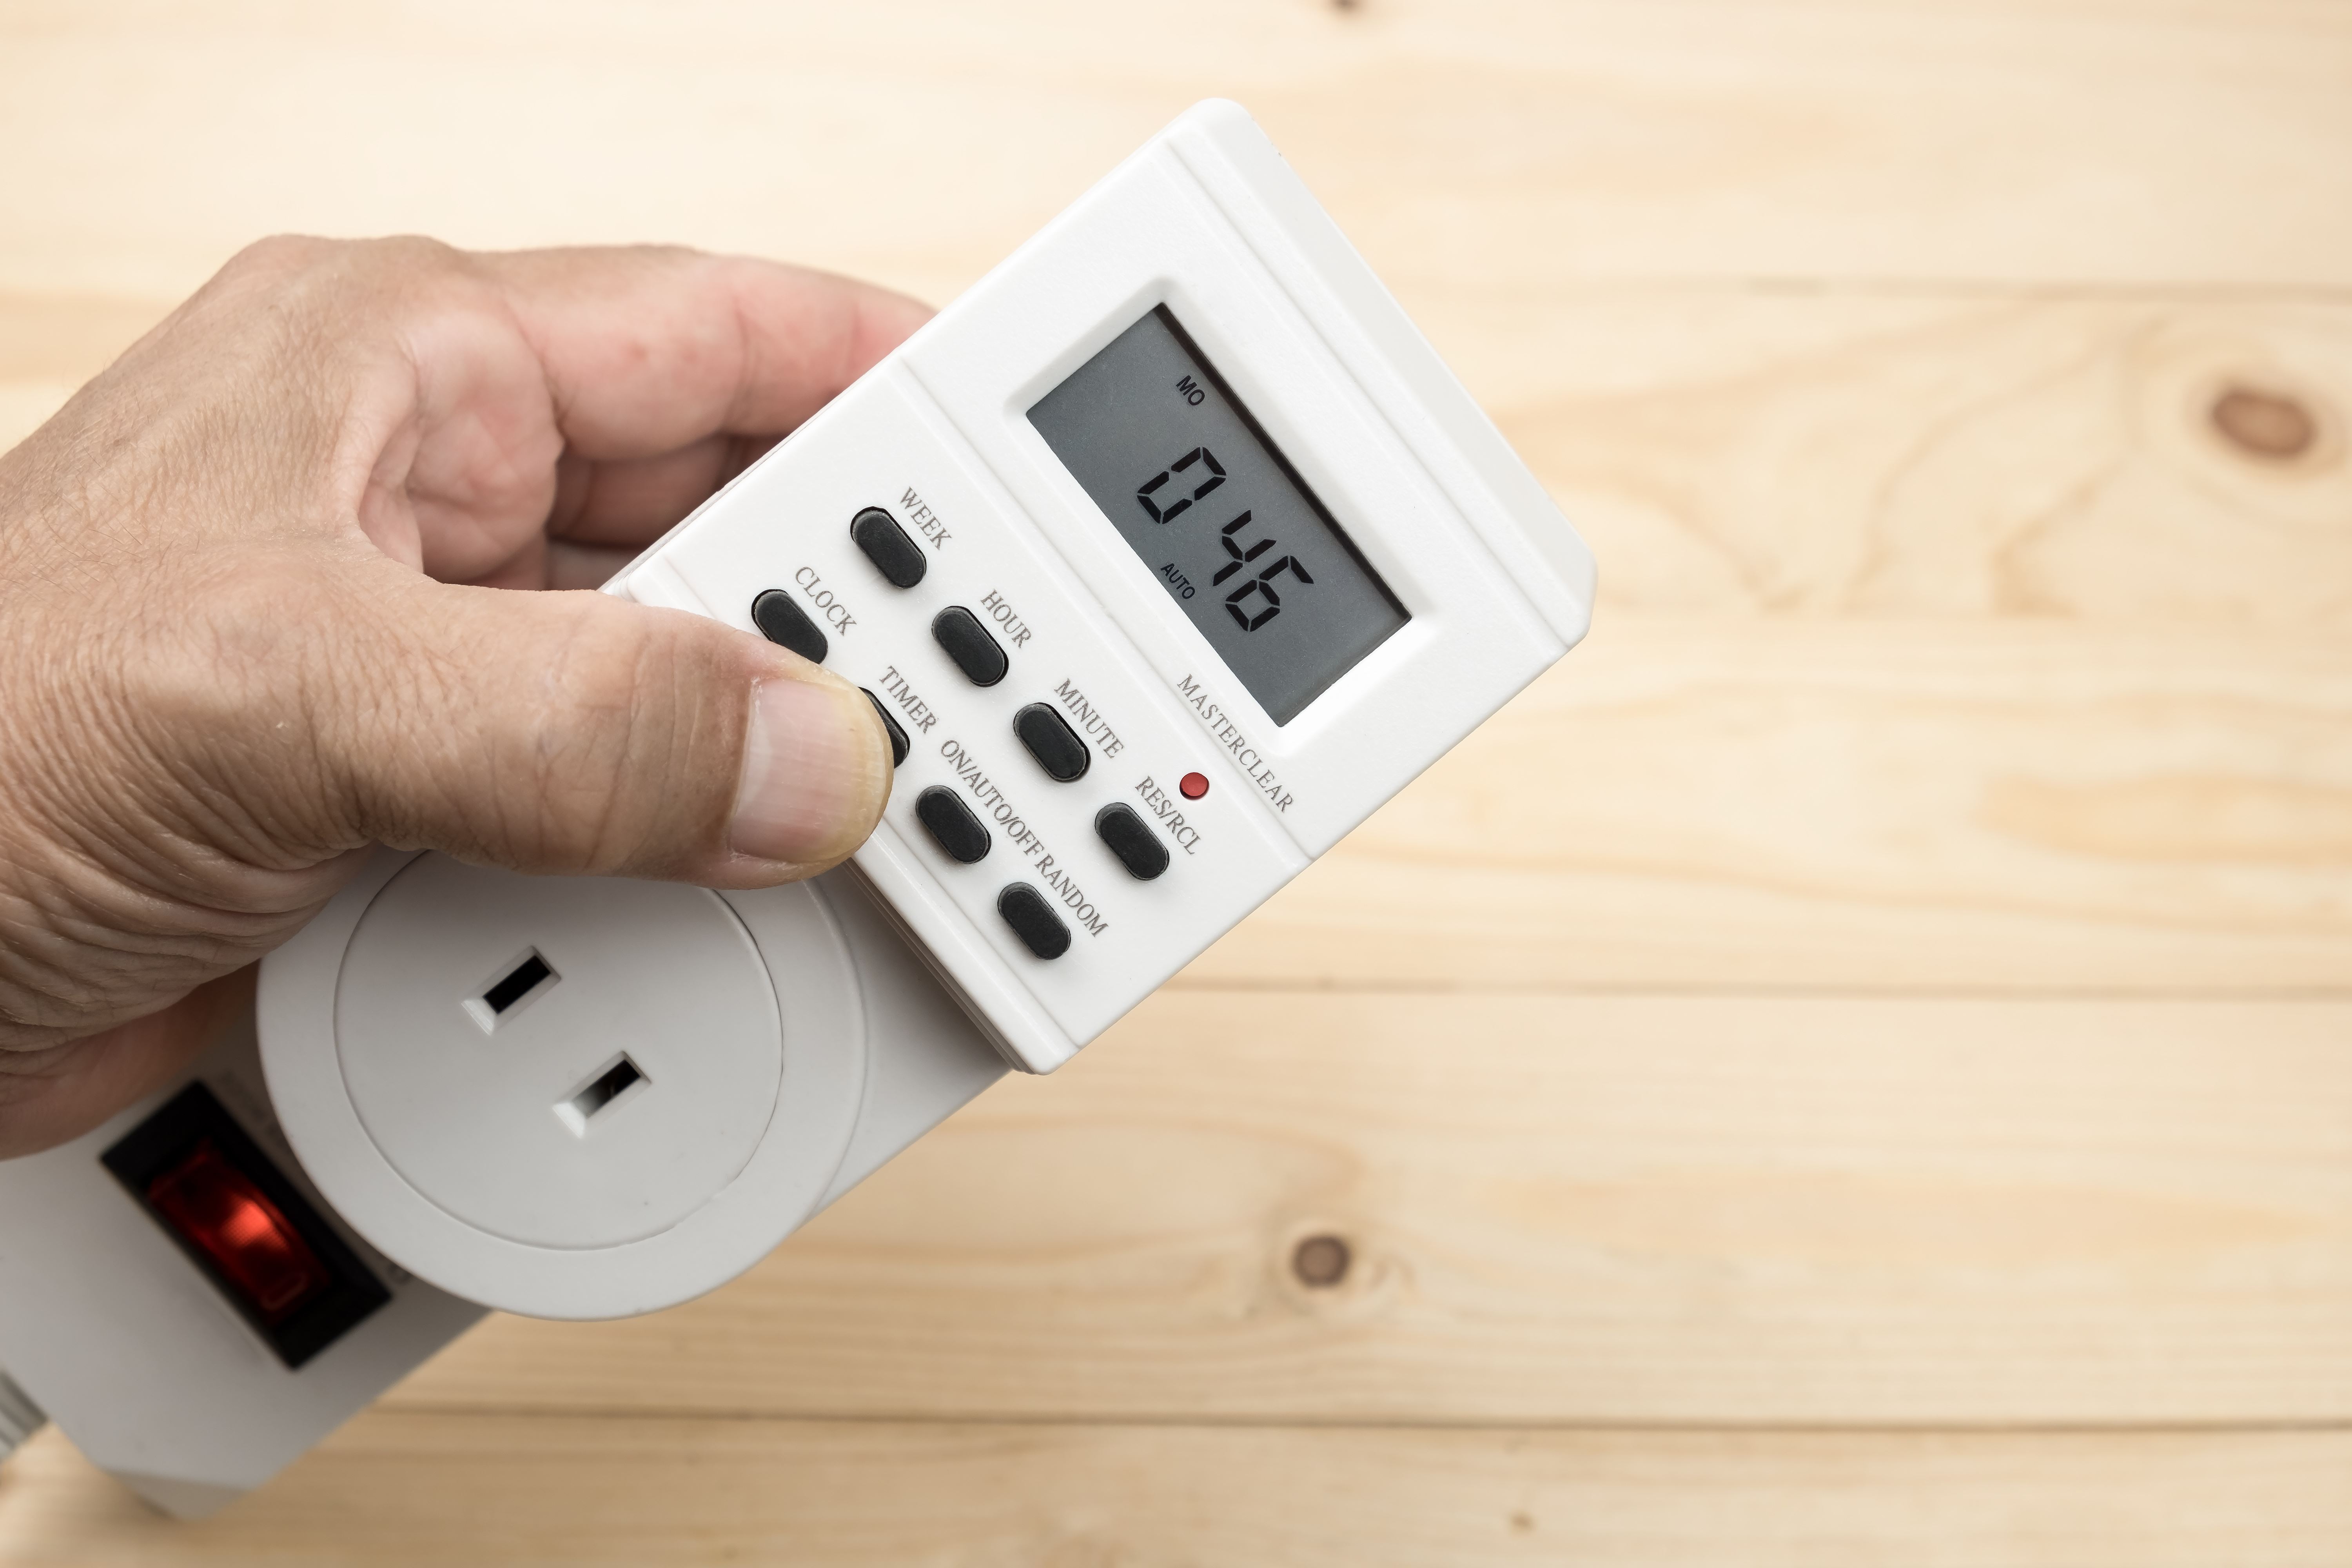 Save Money with a Digital or Mechanical Electric Timer